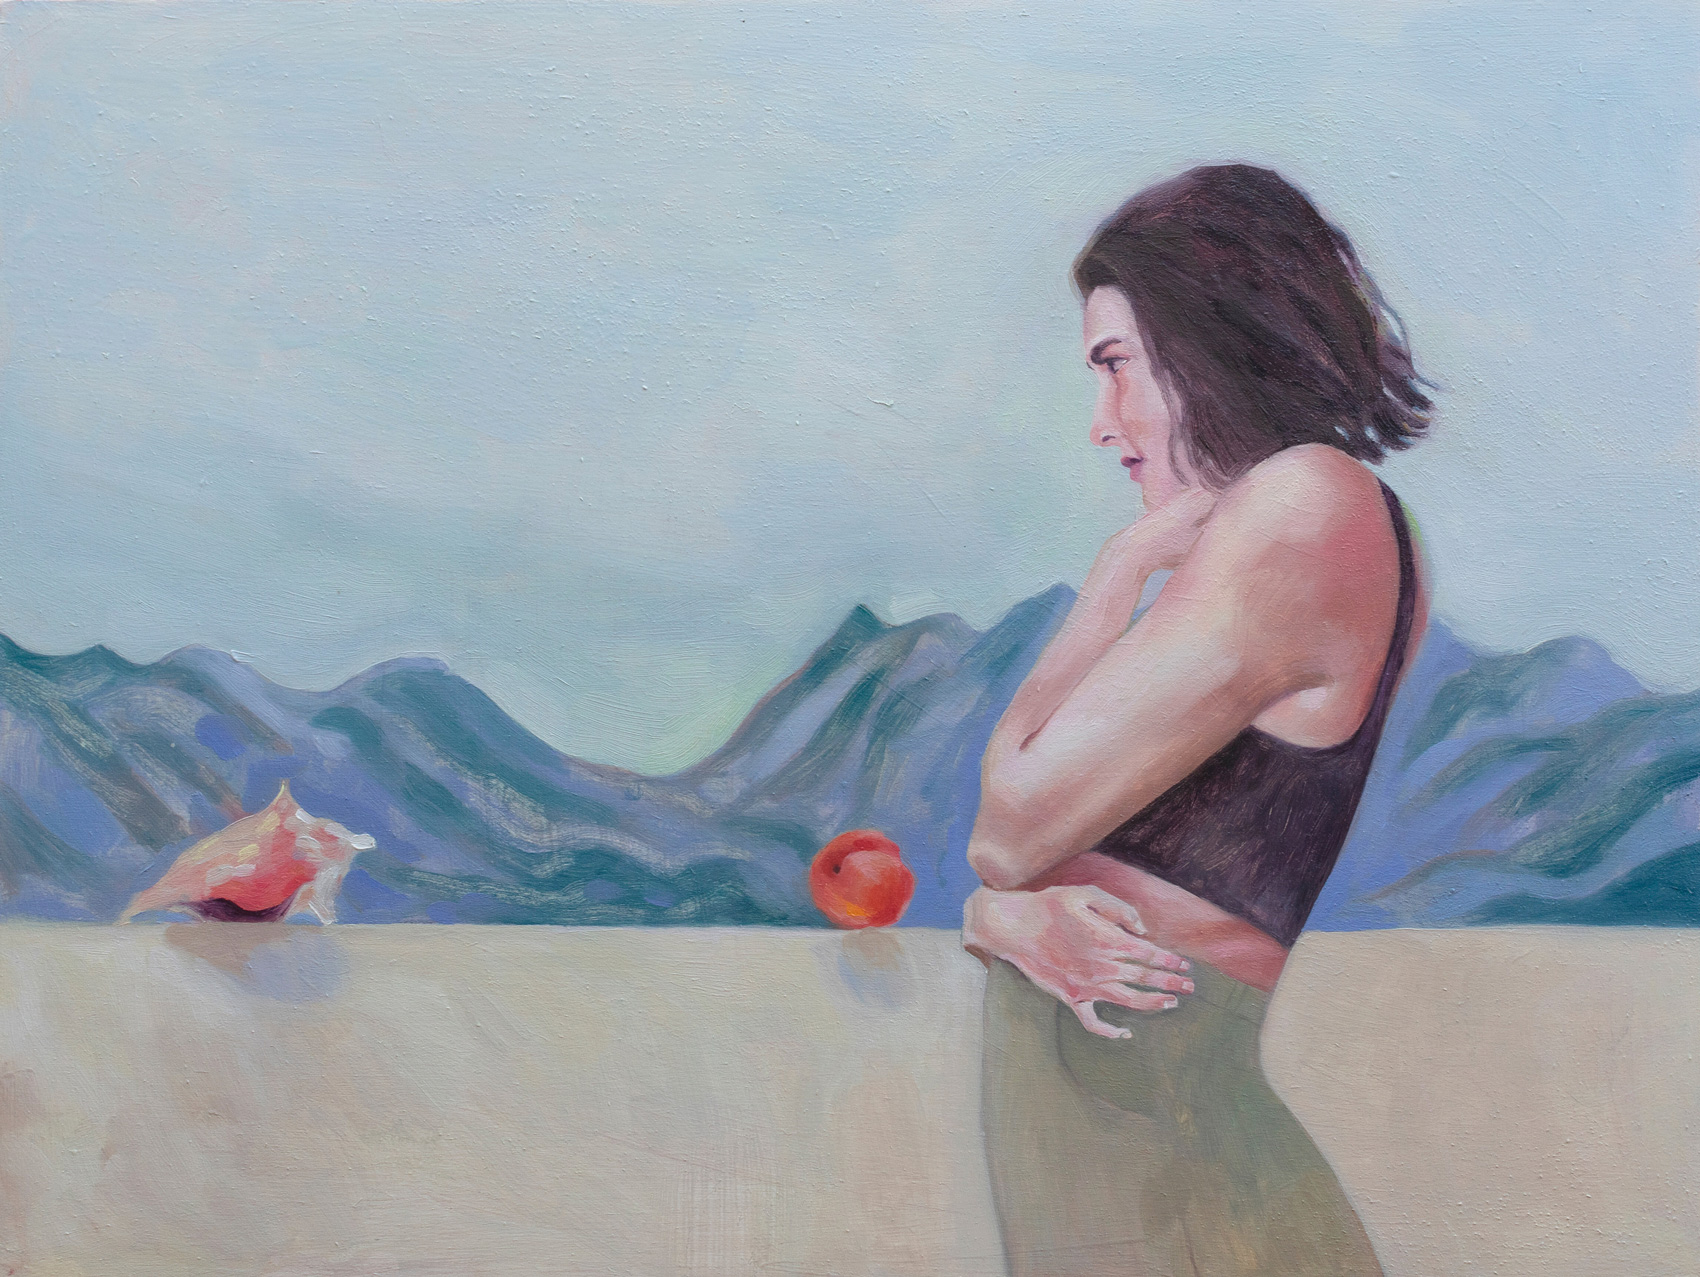 oil painting of a person standing with mountains in the background, they look a little wistful